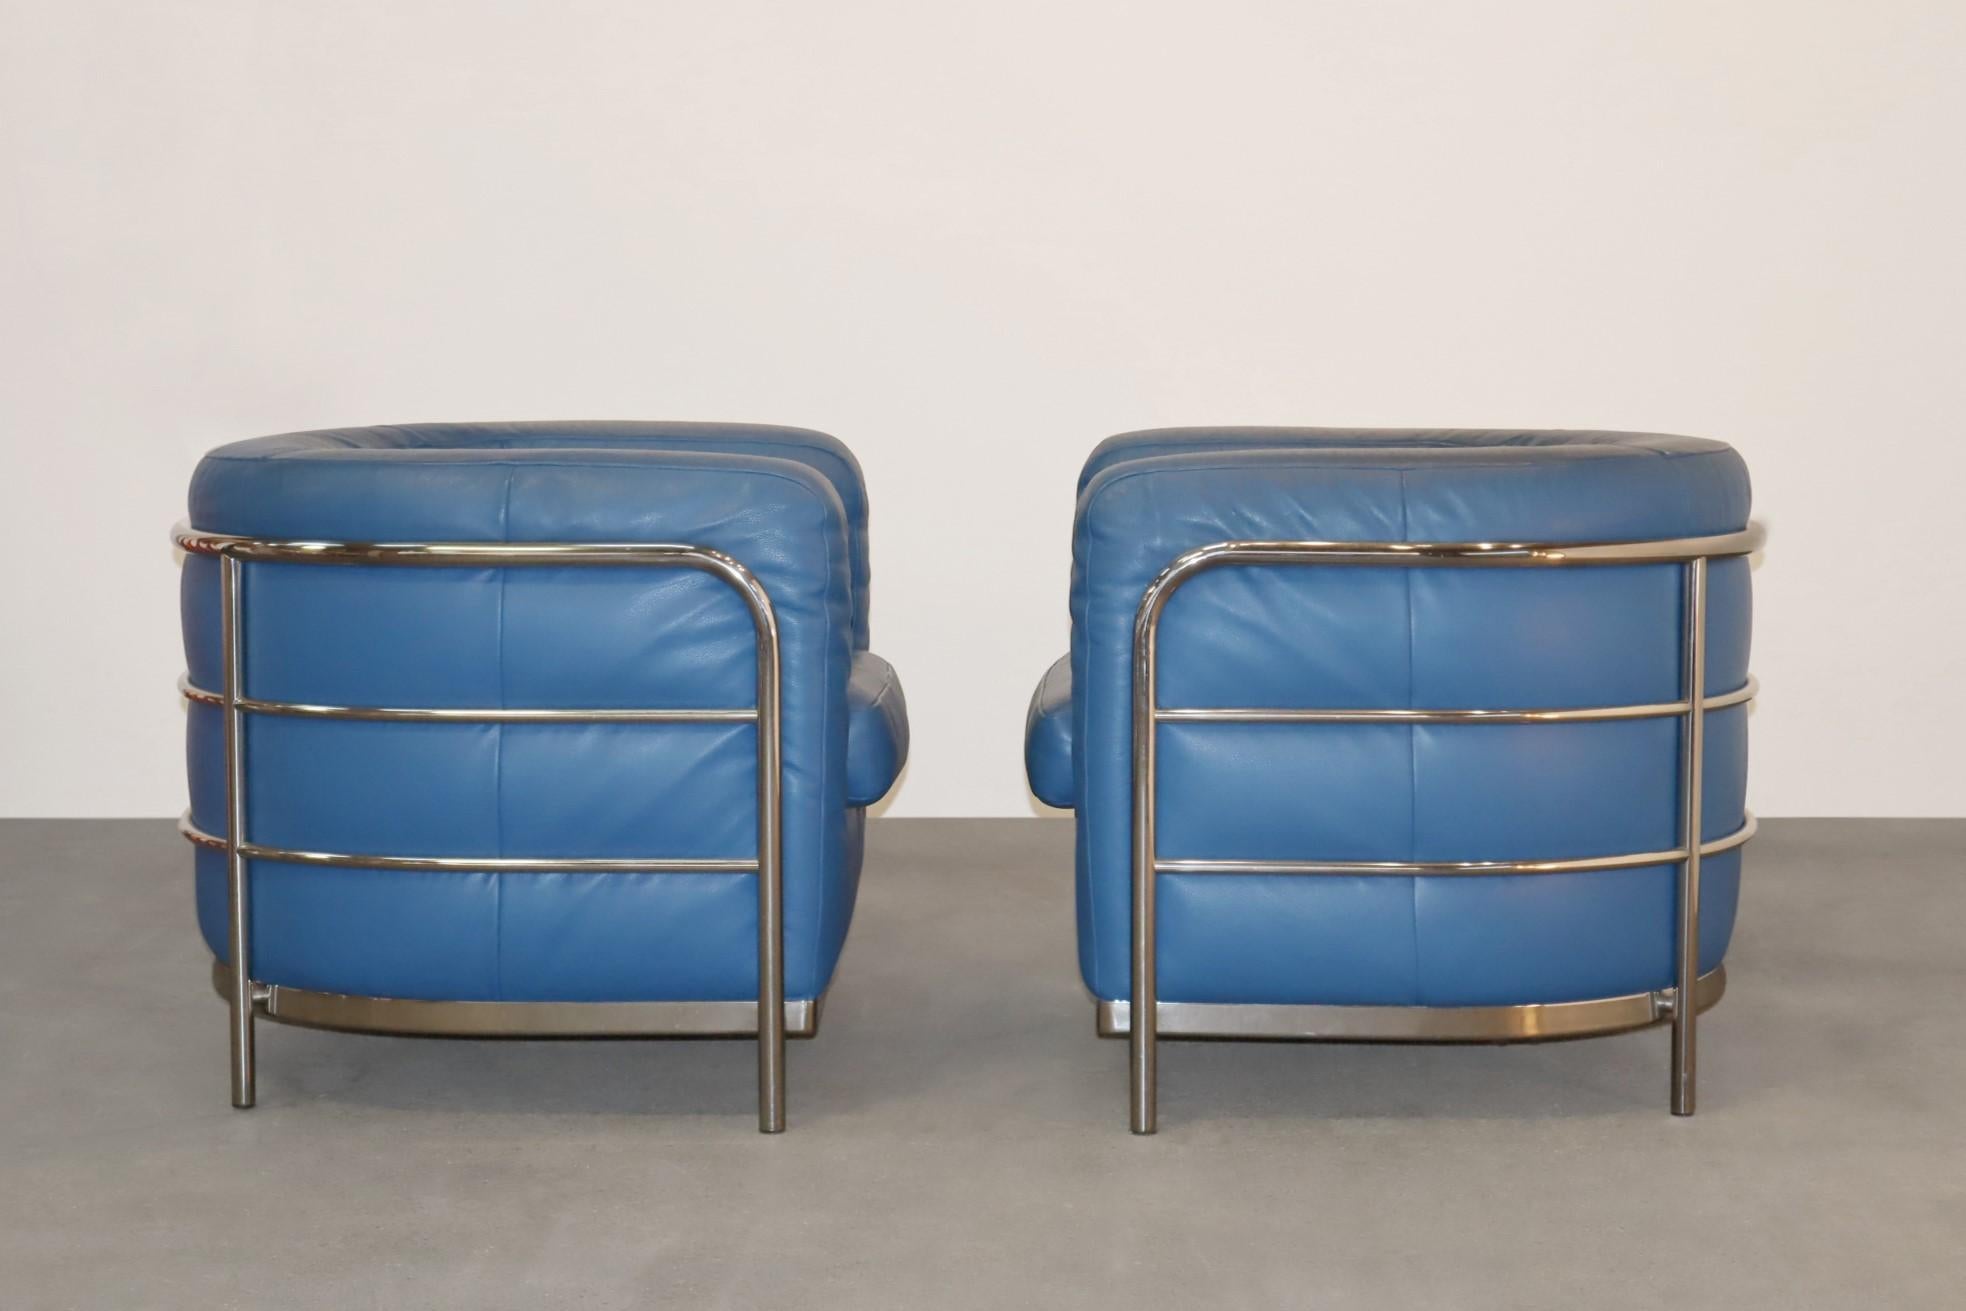 Zanotta Onda Pair of Armchairs in Blue Leather by De Pas, D'urbino For Sale 4